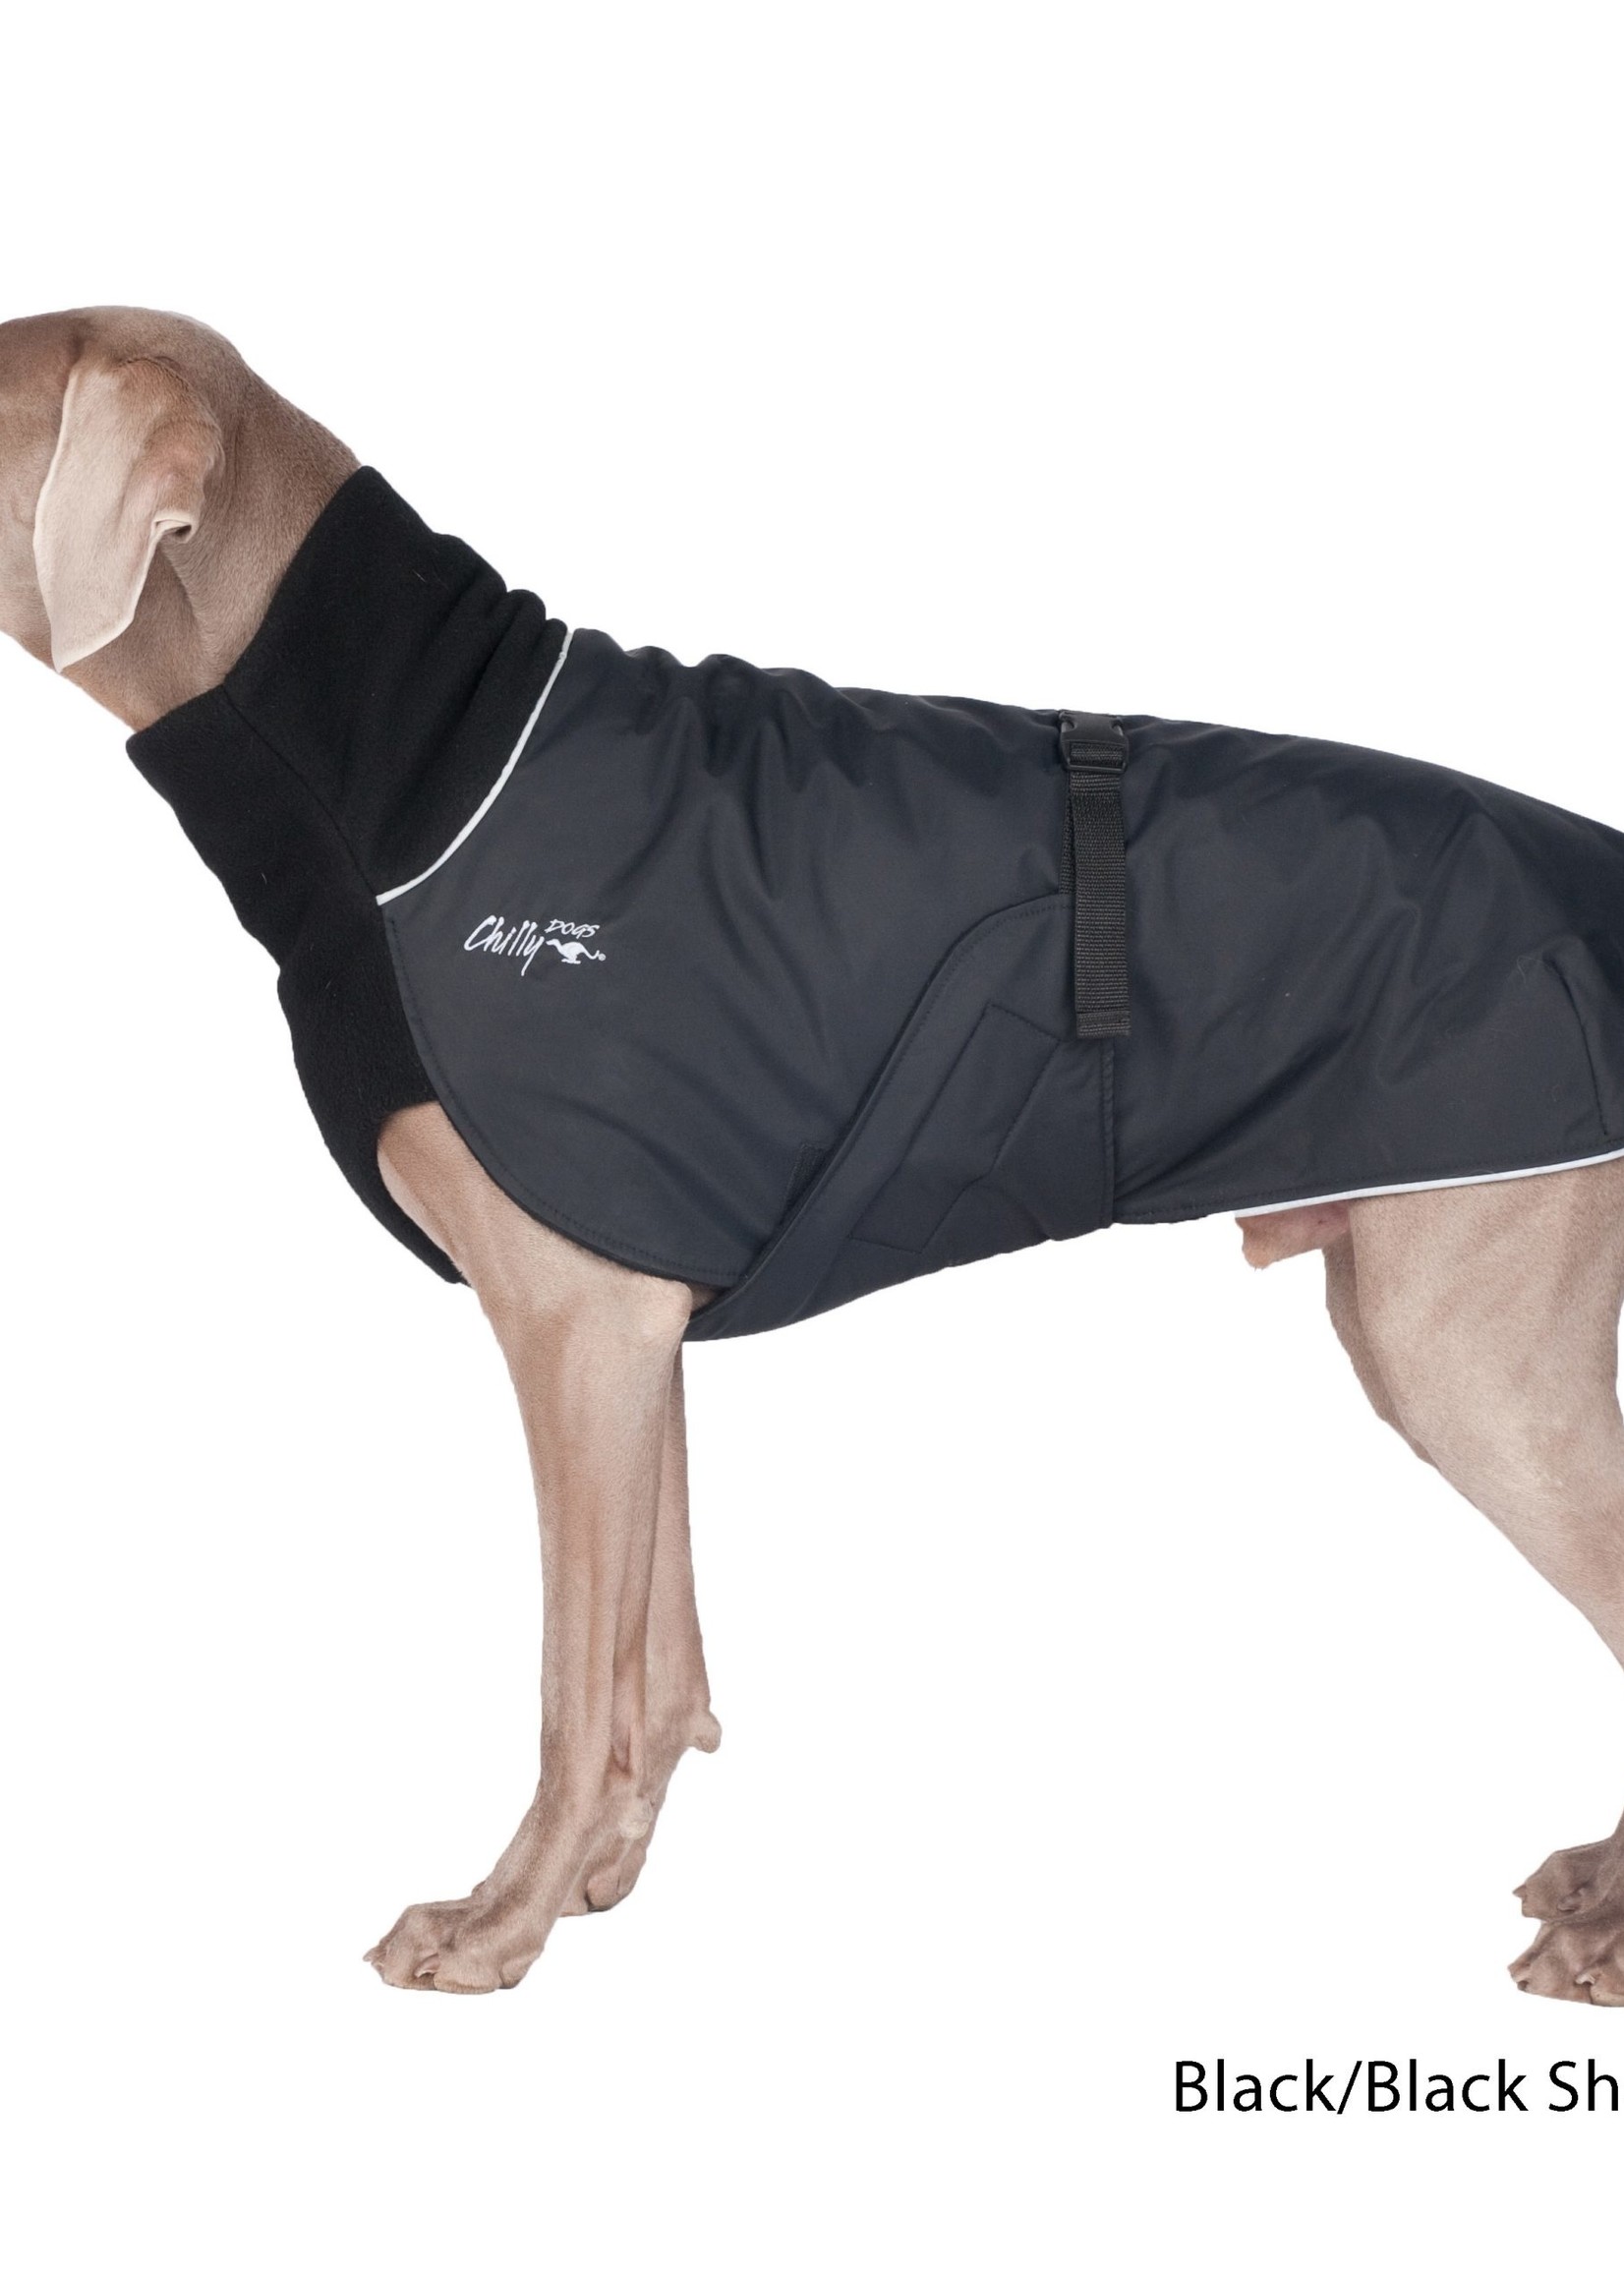 Chilly Dogs Chilly Dogs - Great White North Coat - Standard Fit